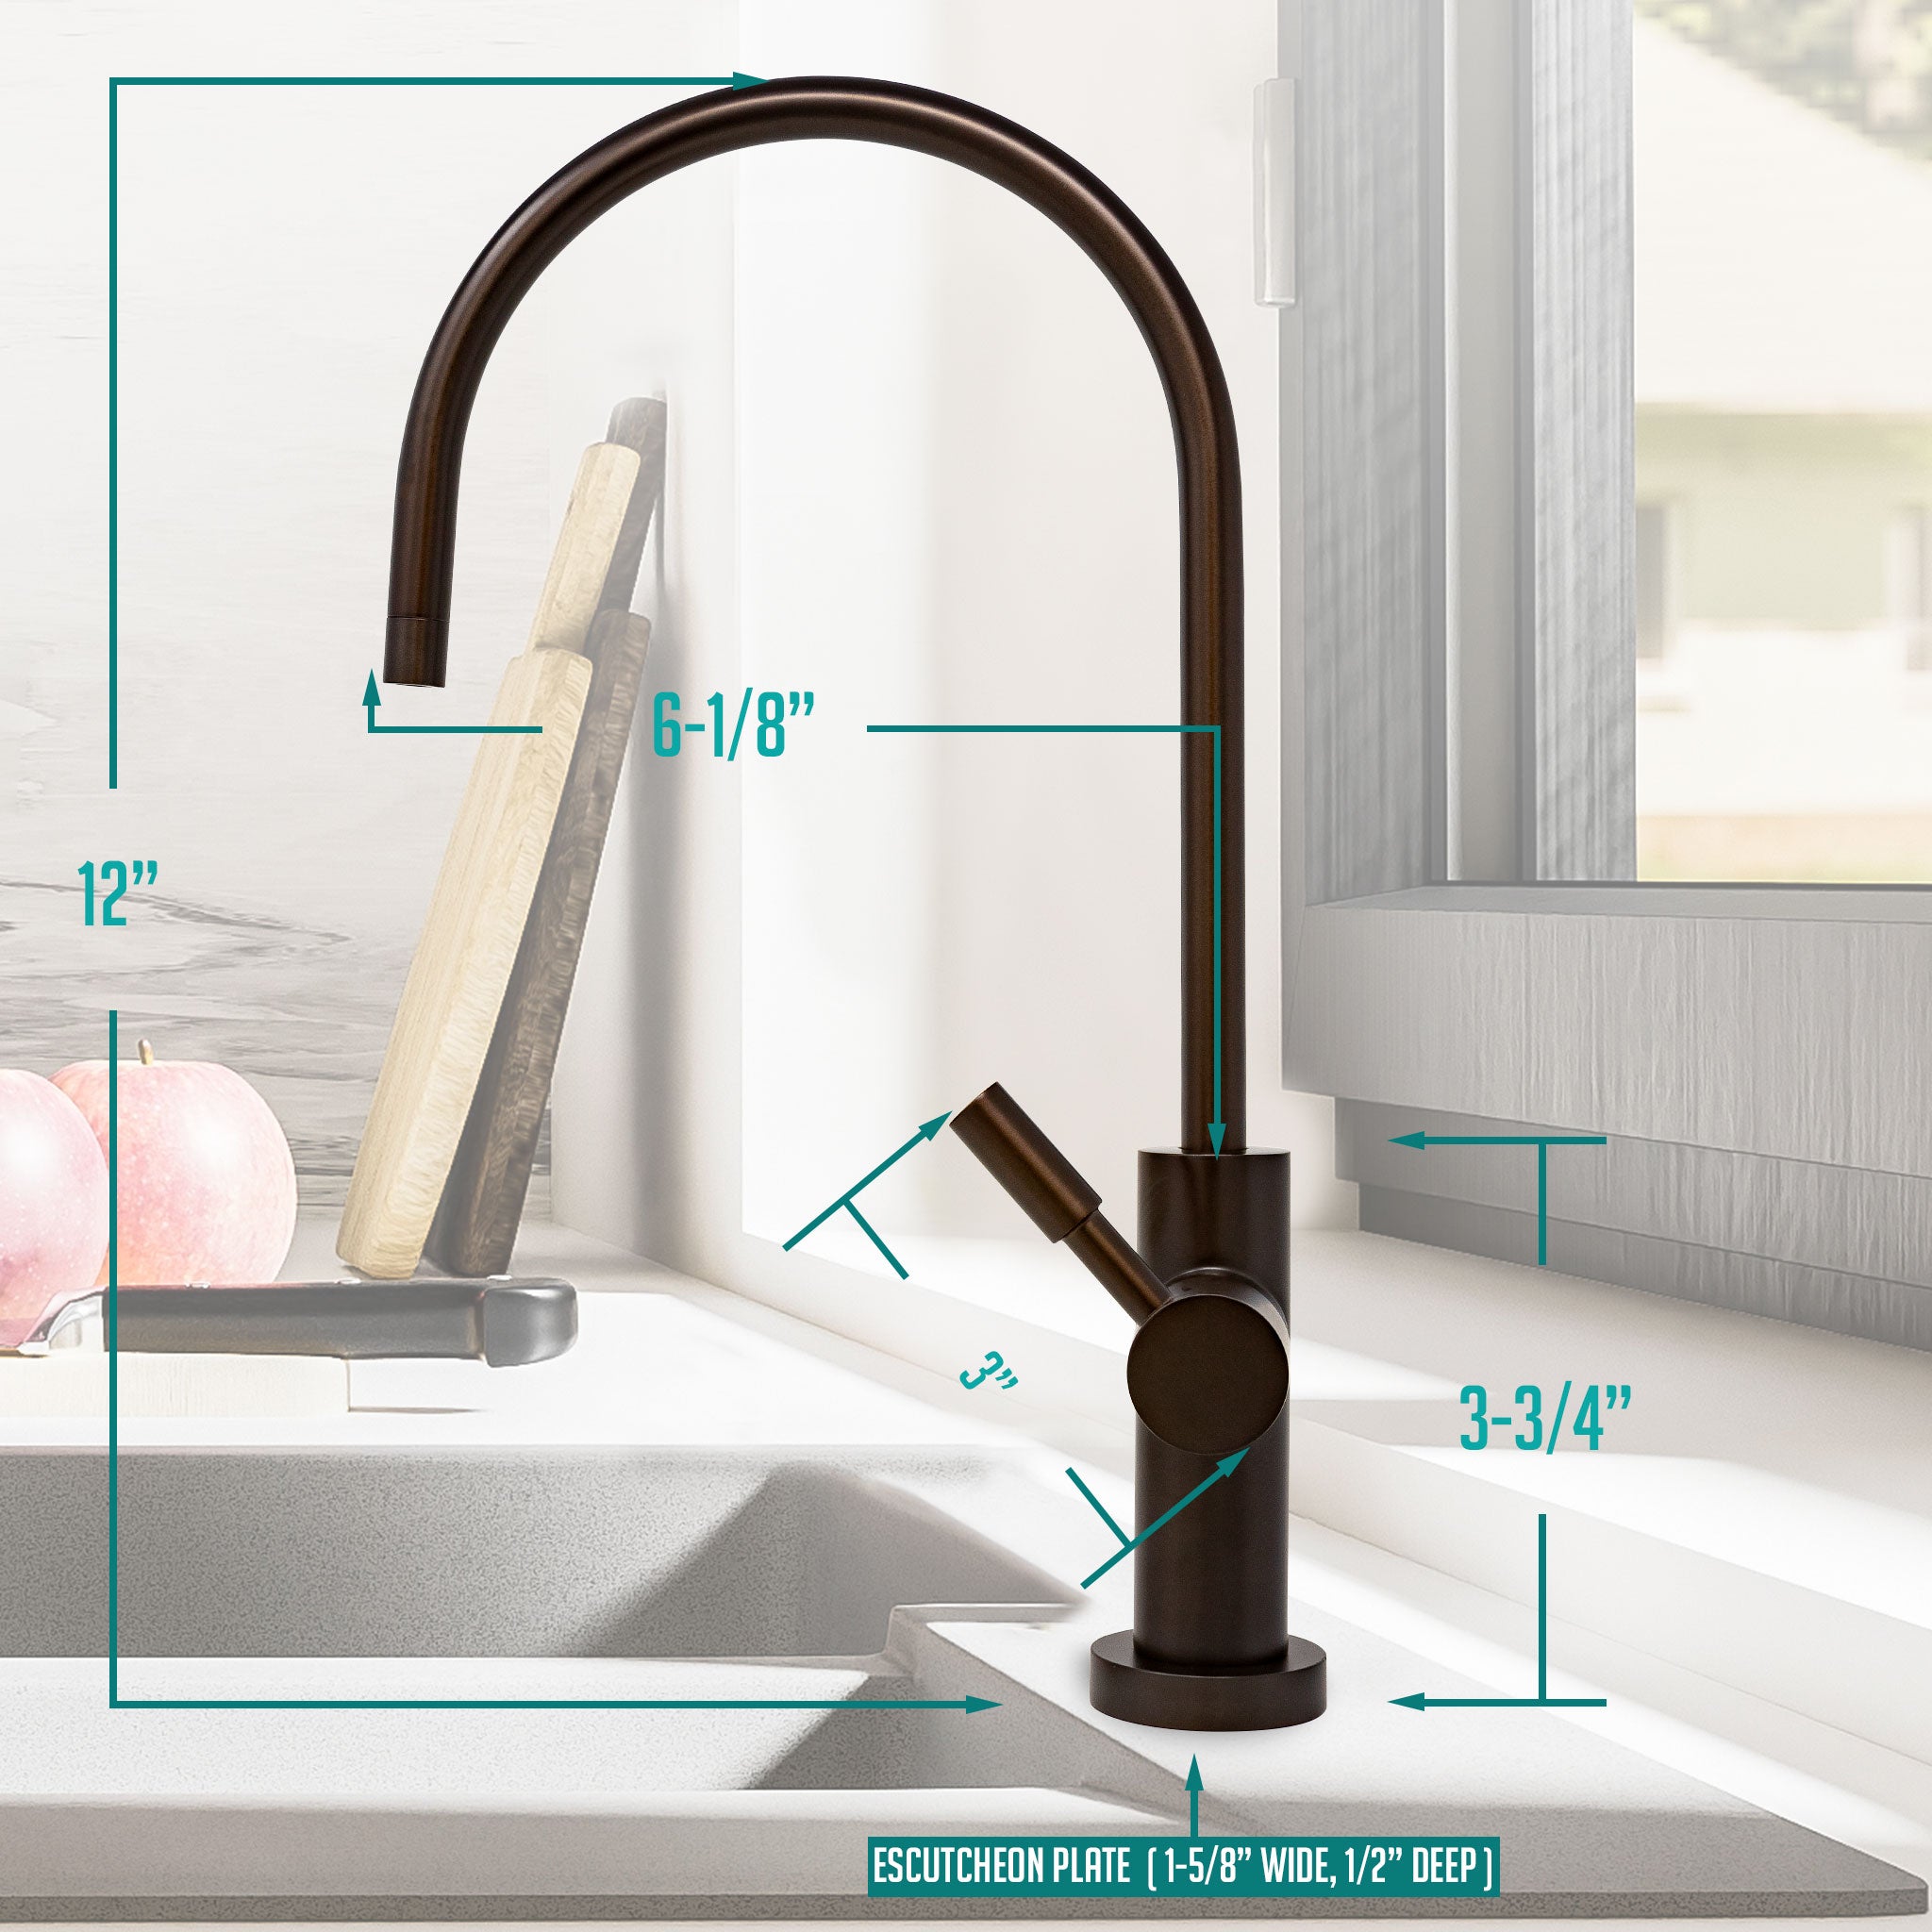 Water Filtration Faucet Oil Rubbed Bronze Large Euro Style Reverse Osmosis Non Air Gap. Certified by NSF